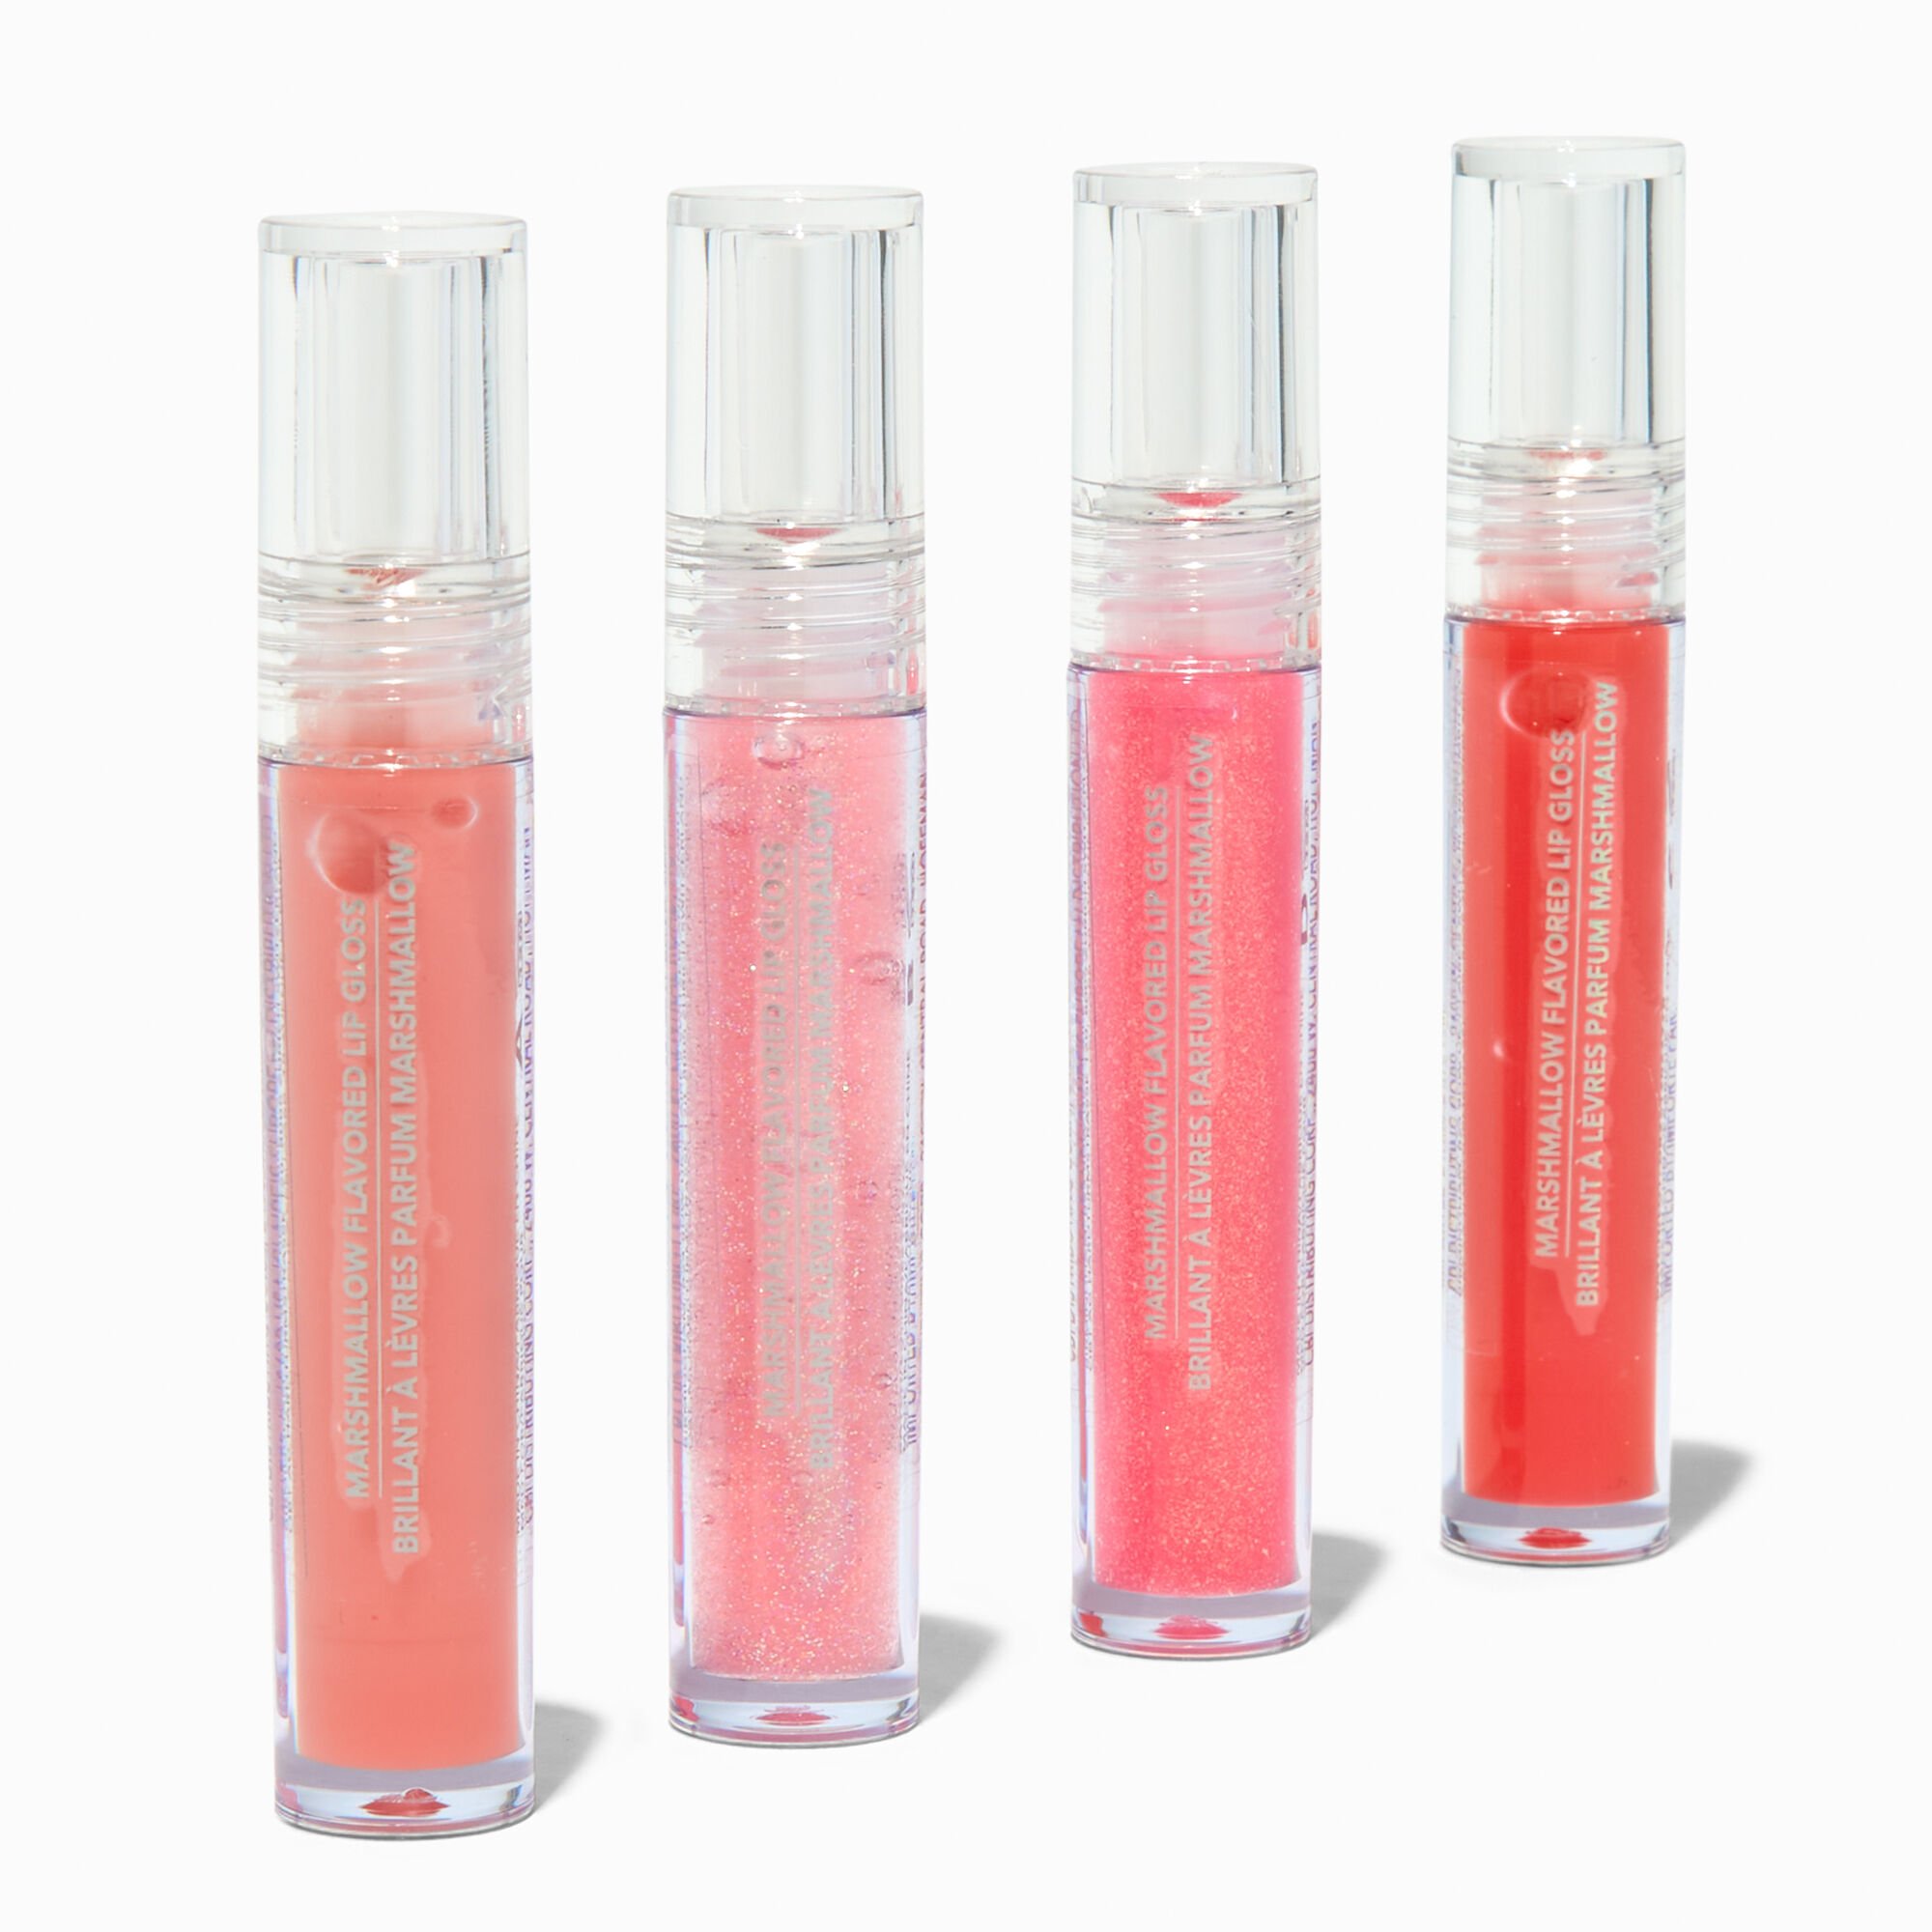 View Claires Peachy Scented Lip Gloss Set 4 Pack information